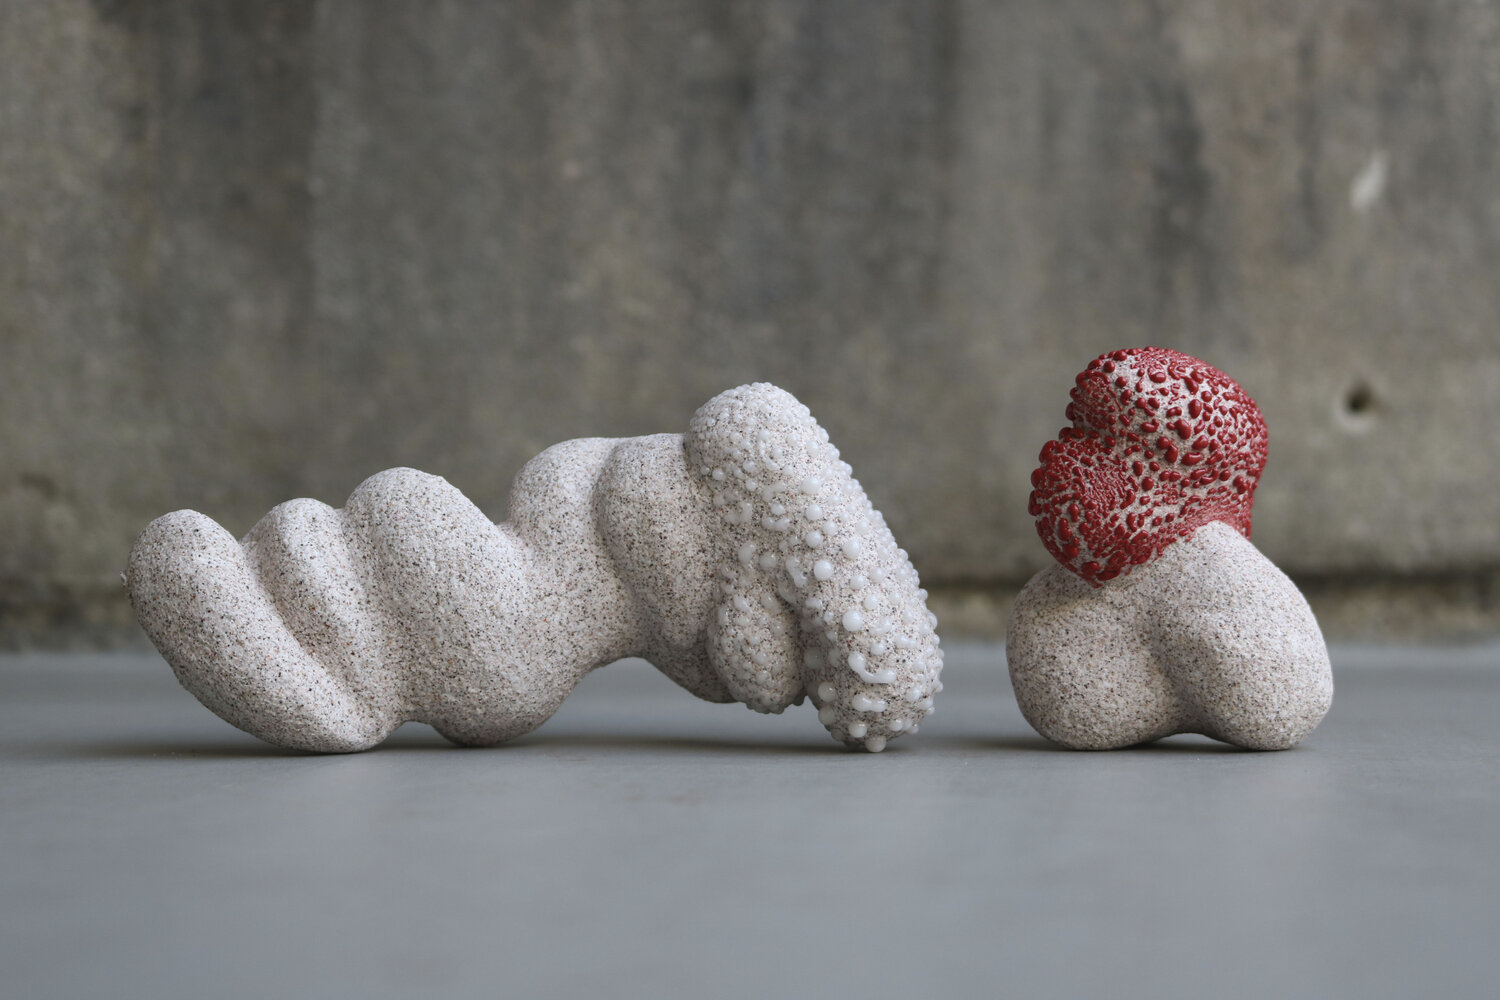 Narelle White's abstract sculptures displayed on a concrete floor with concrete backdrop